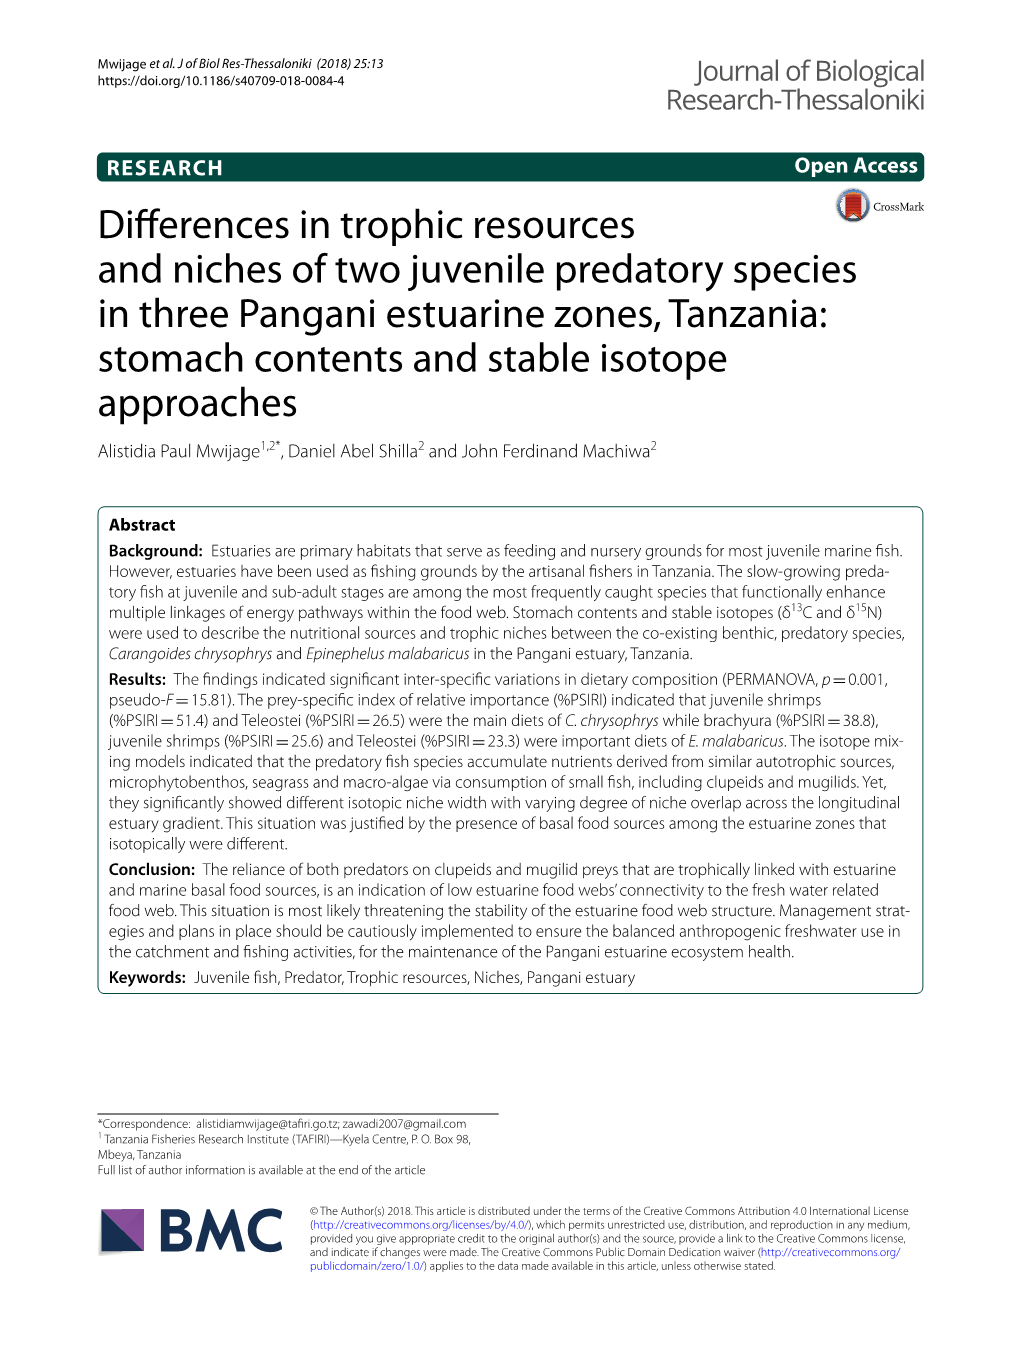 Differences in Trophic Resources and Niches of Two Juvenile Predatory Species in Three Pangani Estuarine Zones, Tanzania